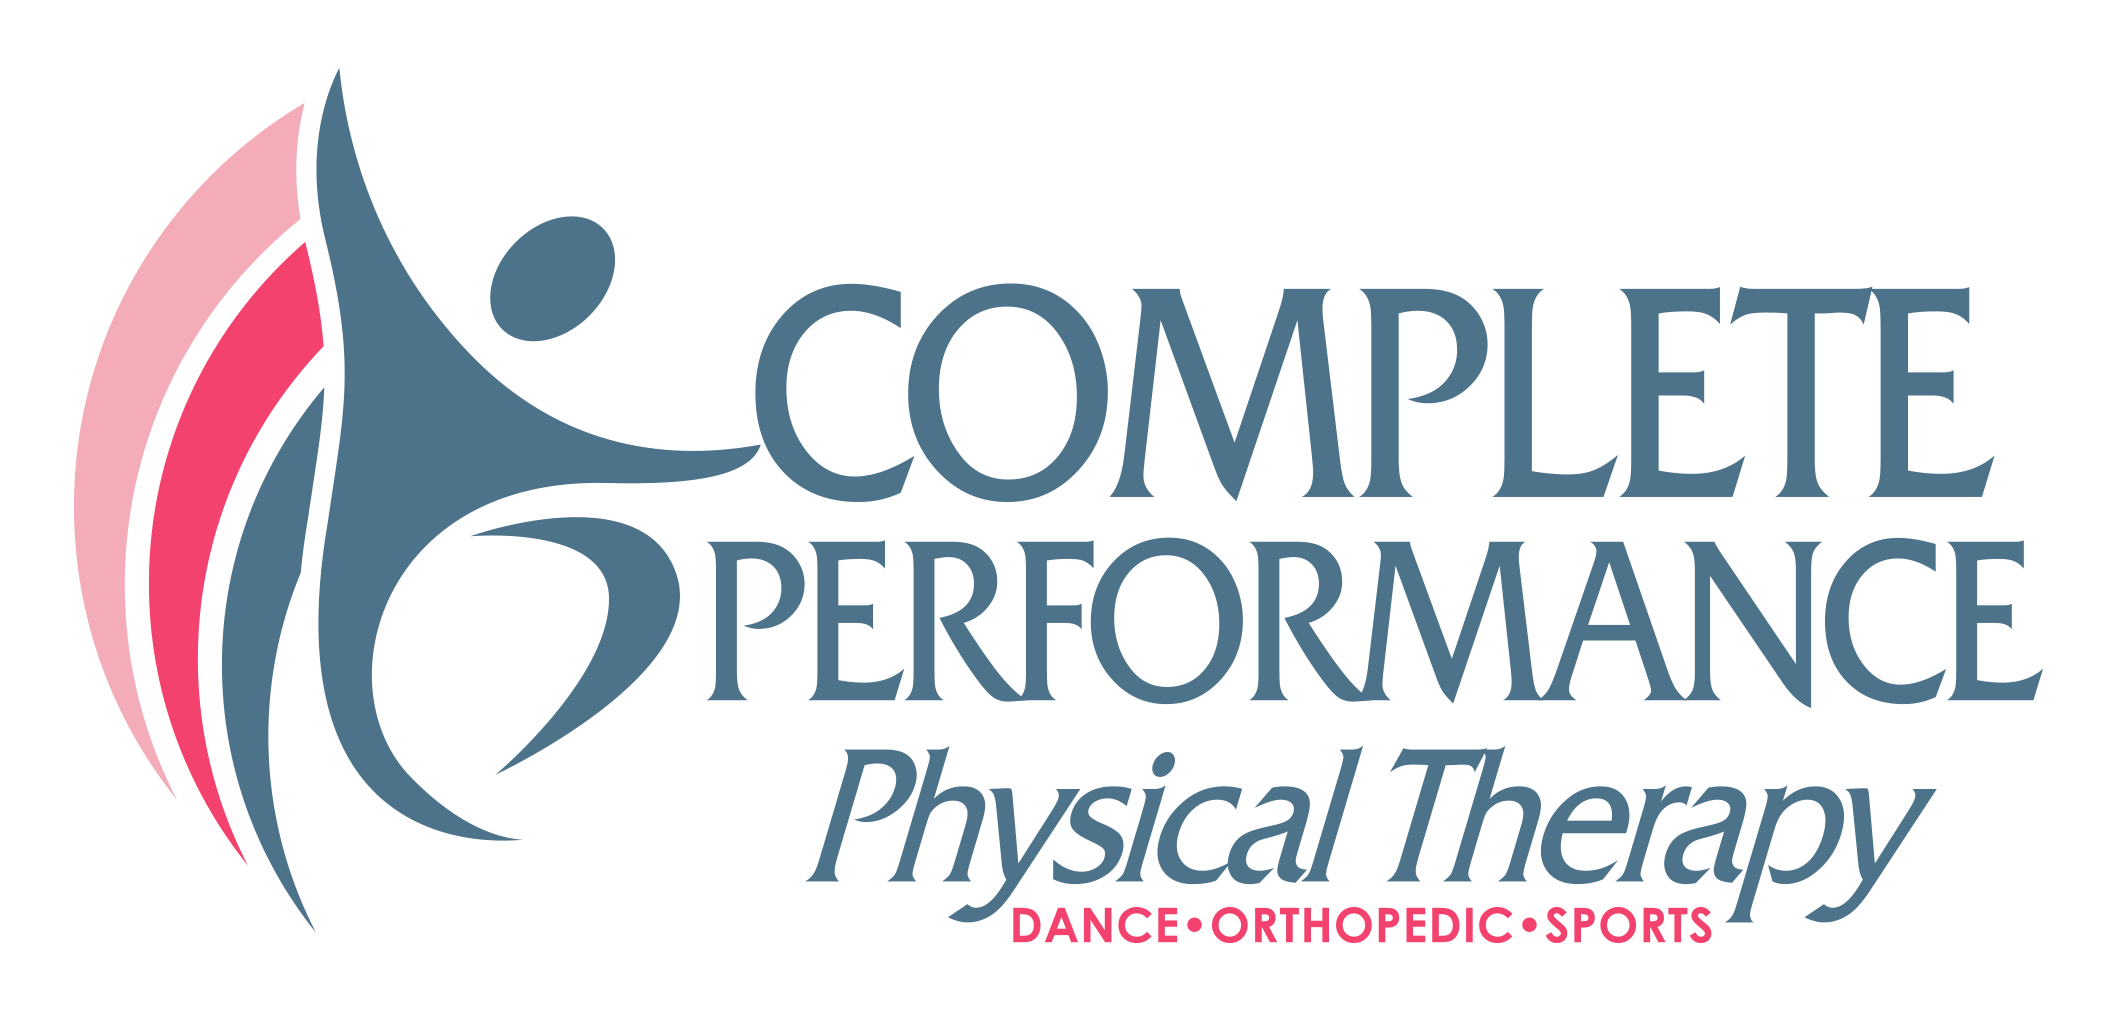 Complete Performance Physical Therapy